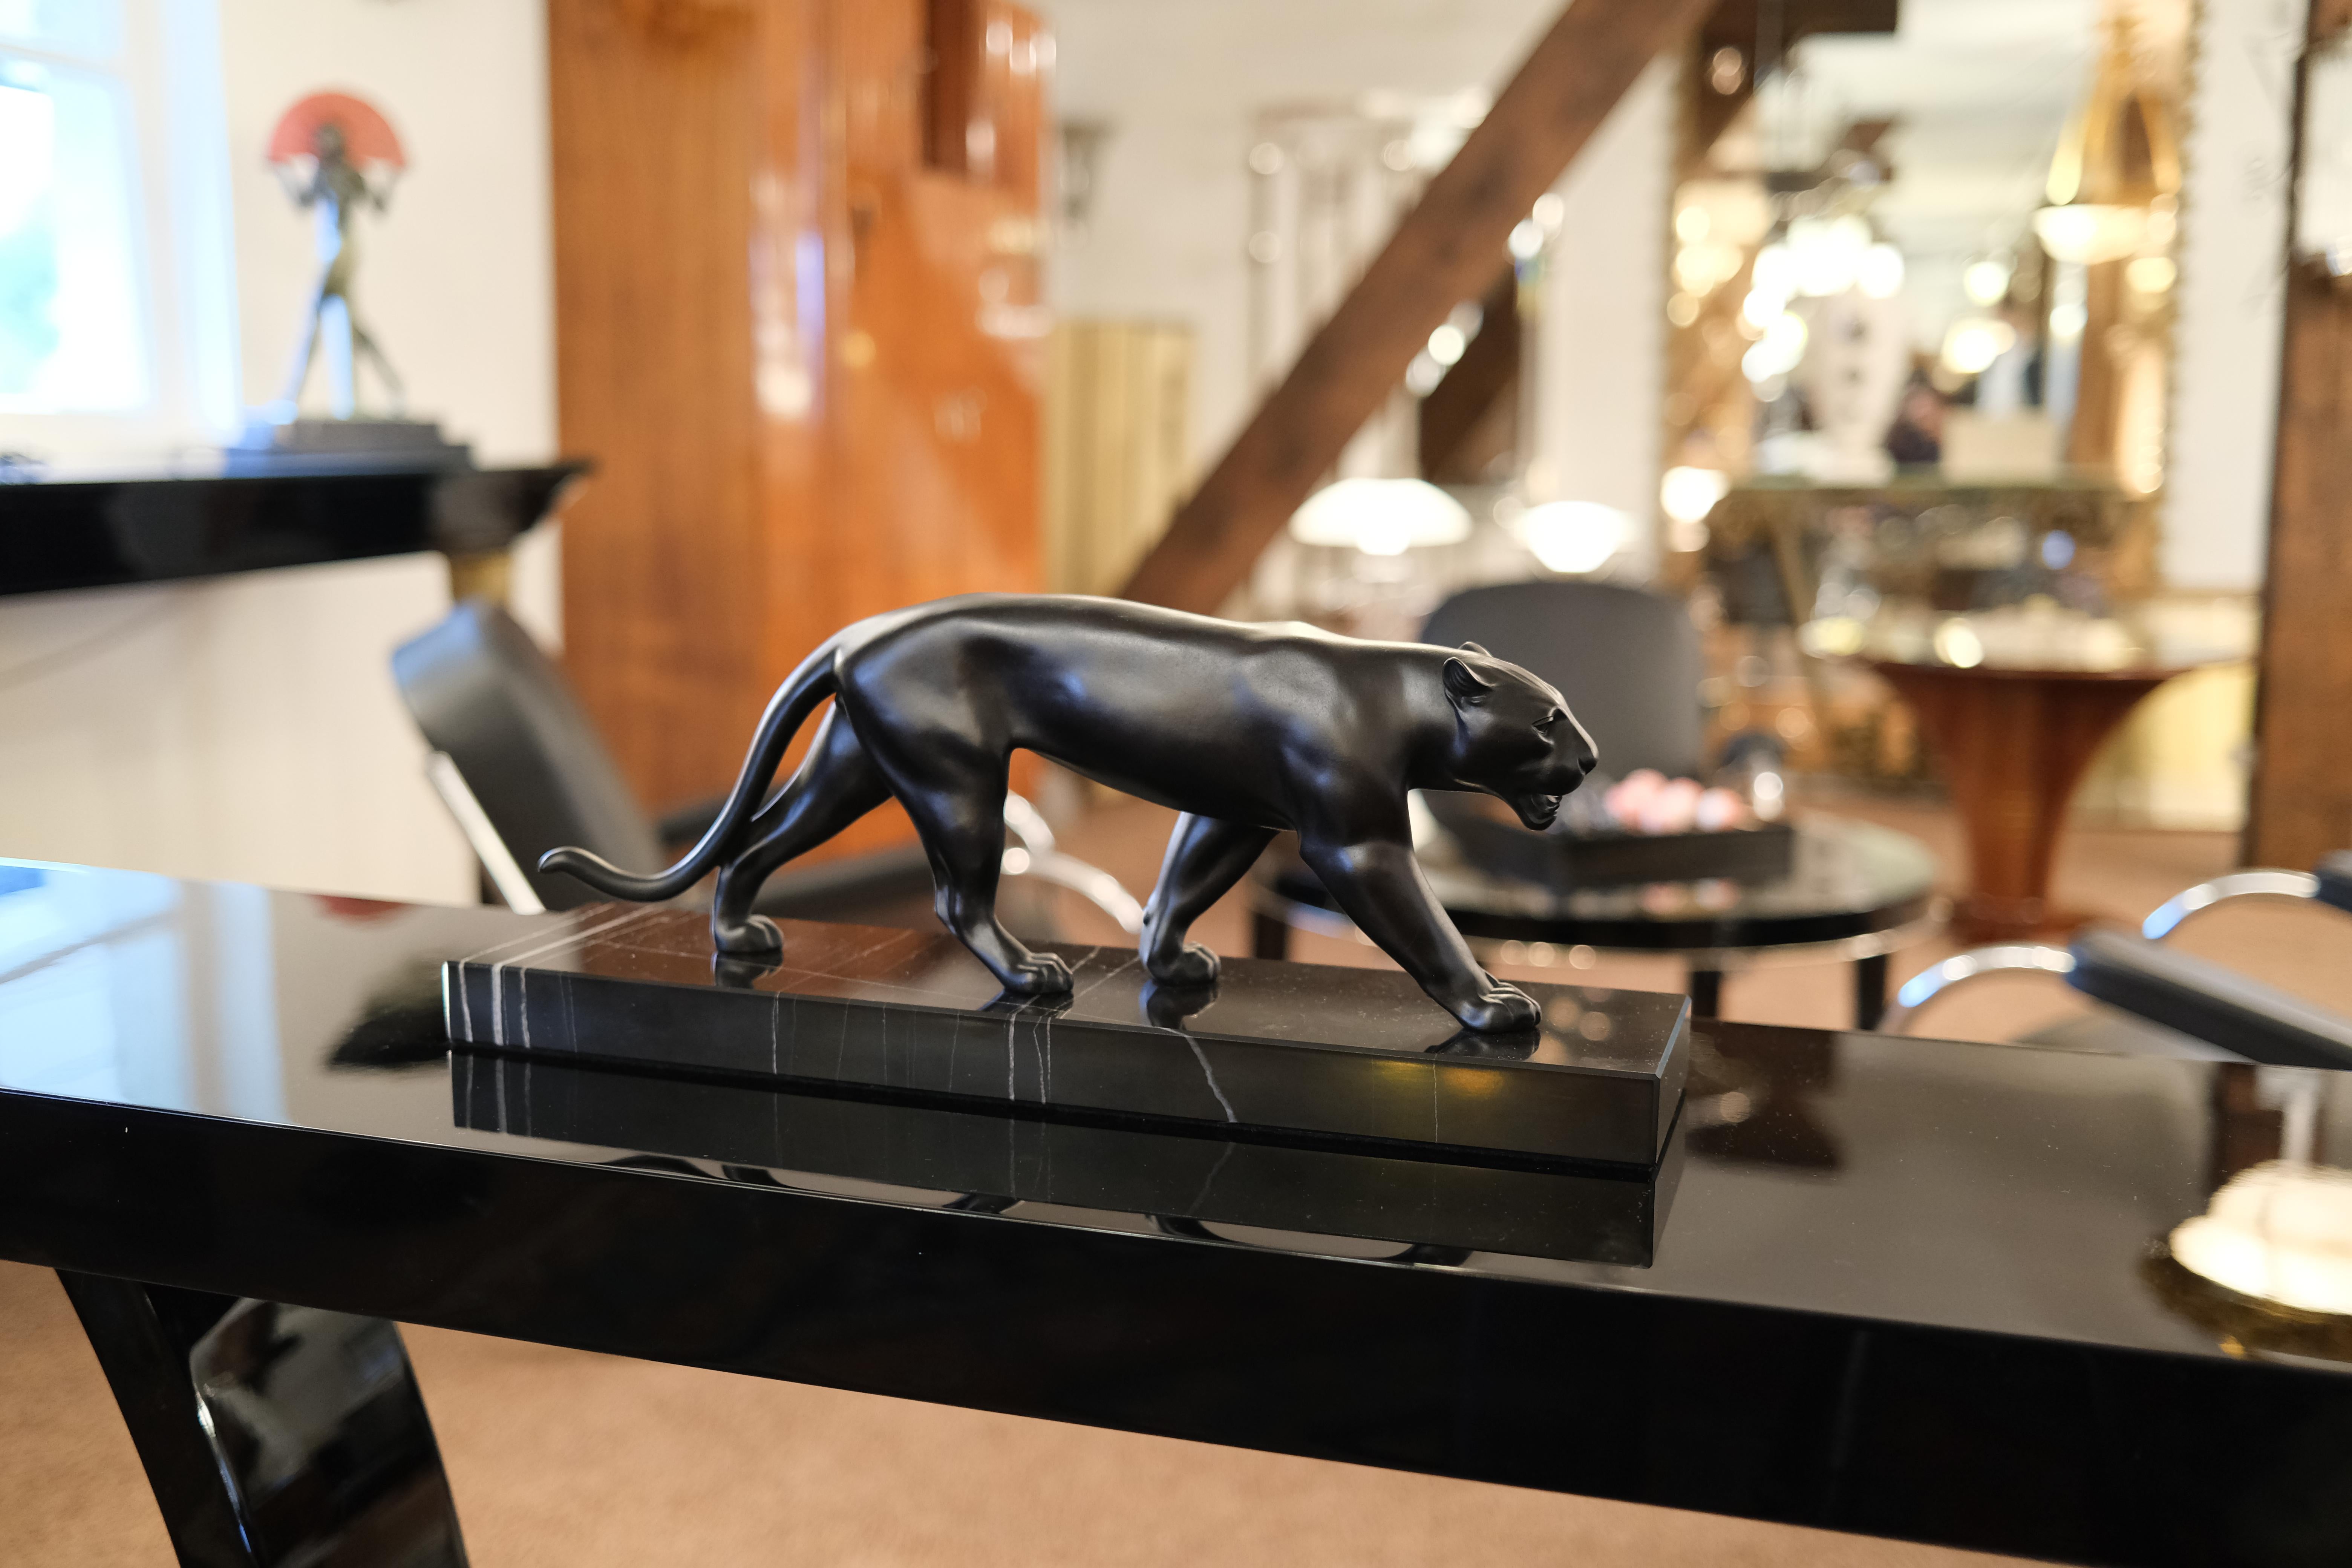 Lion or panther sculpture named “Ouganda”
Original “Max Le Verrier”, signed
Designed in France by “Max Le Verrier” (1891-1973) himself 
Art Deco style, France 

Materials: balck patinated spelter (French: régule), marble base
Socle could have